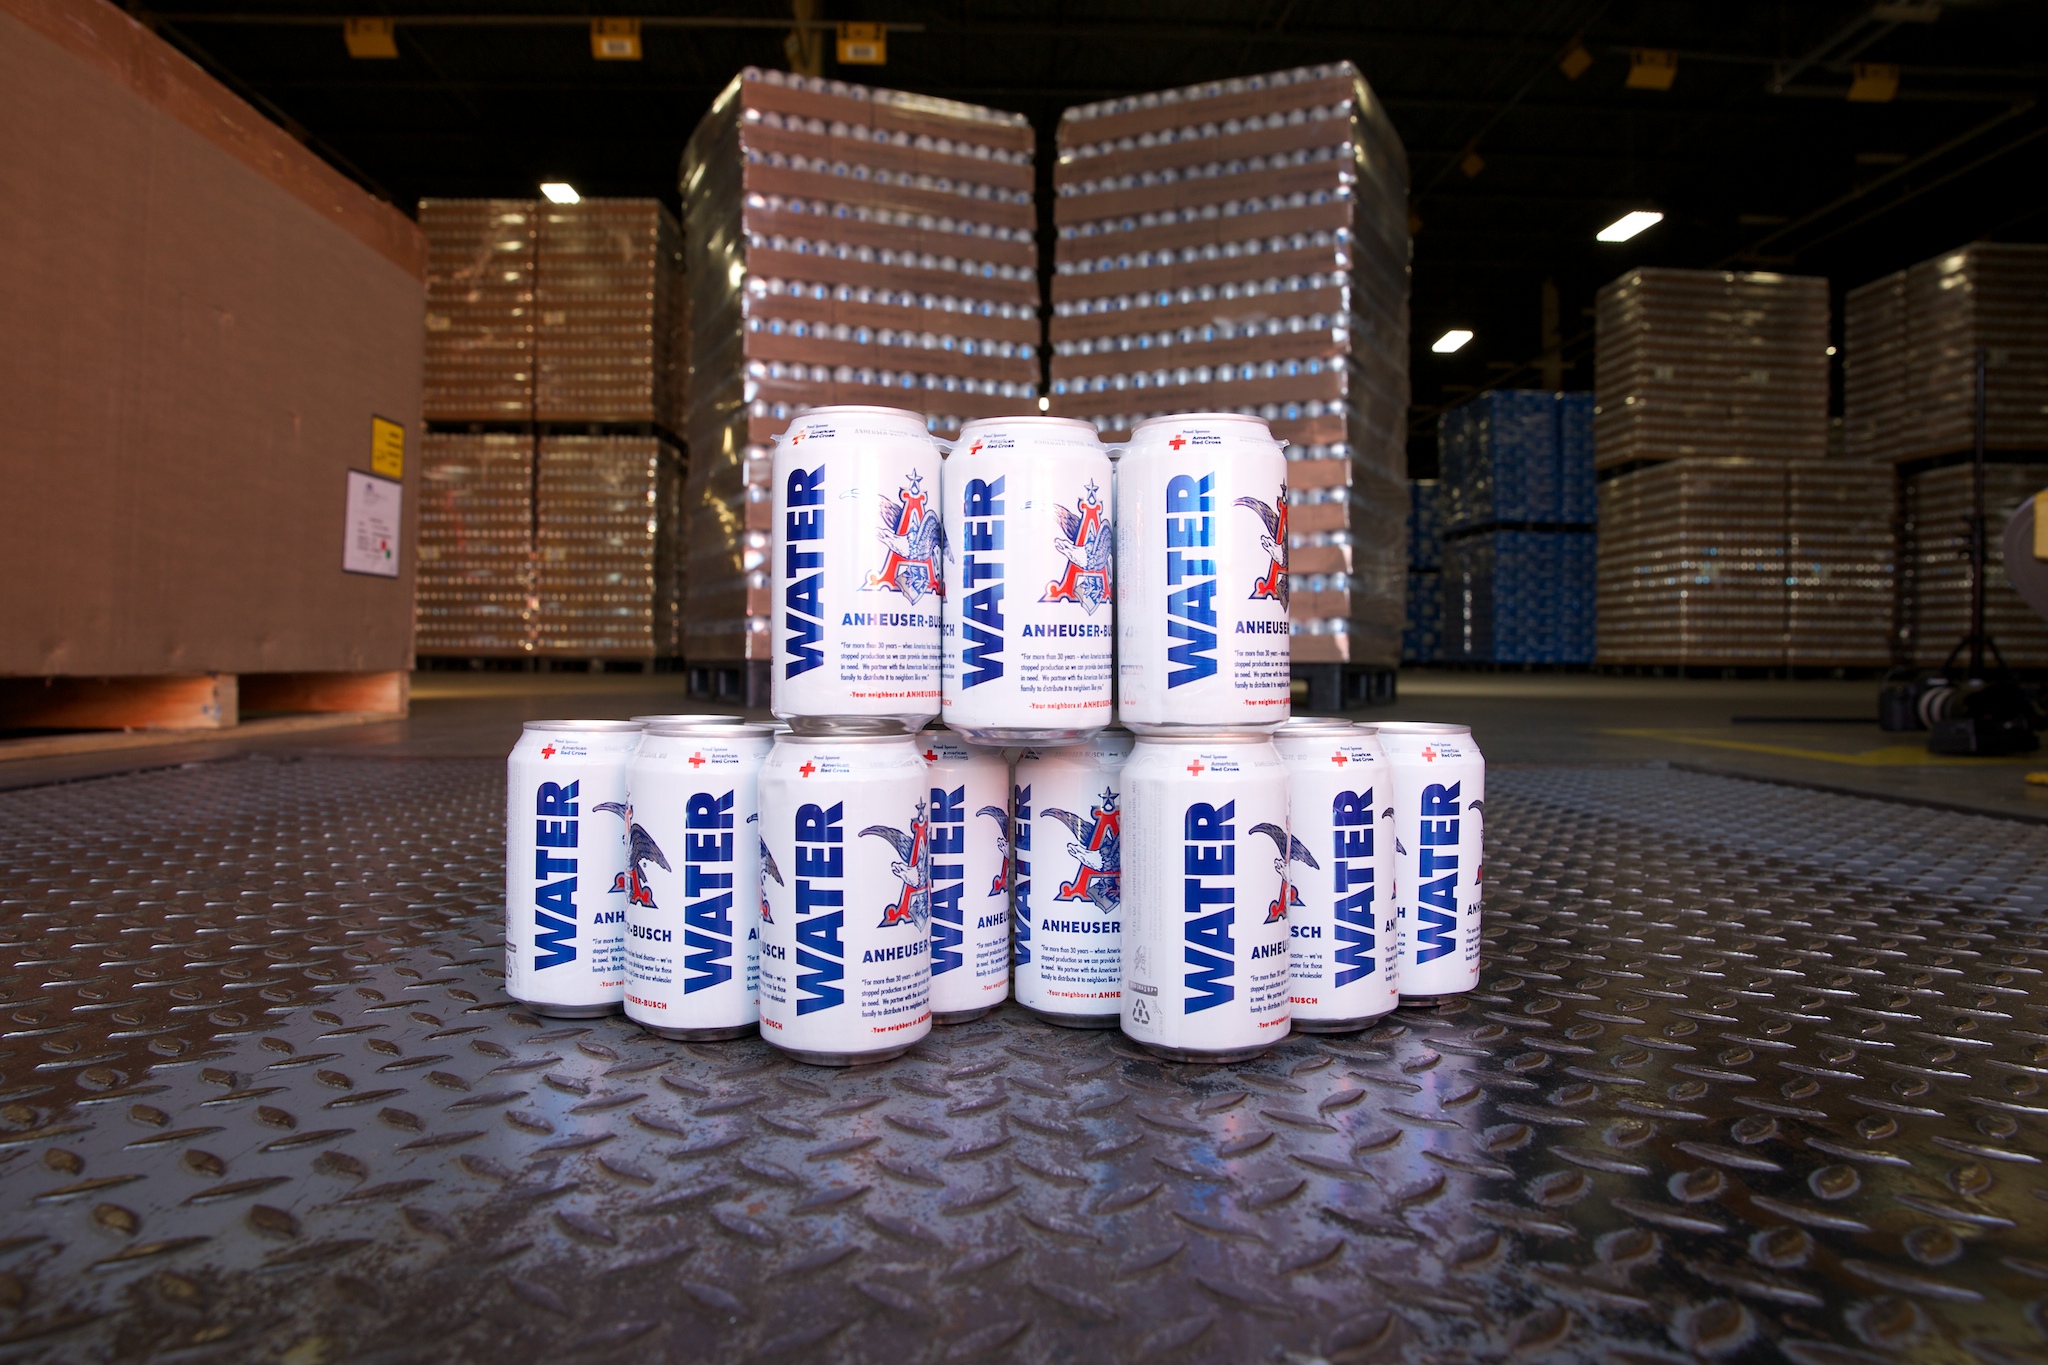 Anheuser-Busch Delivering 50,000 Cans of Emergency Drinking Water to Support Wildfire Relief Efforts in Colorado